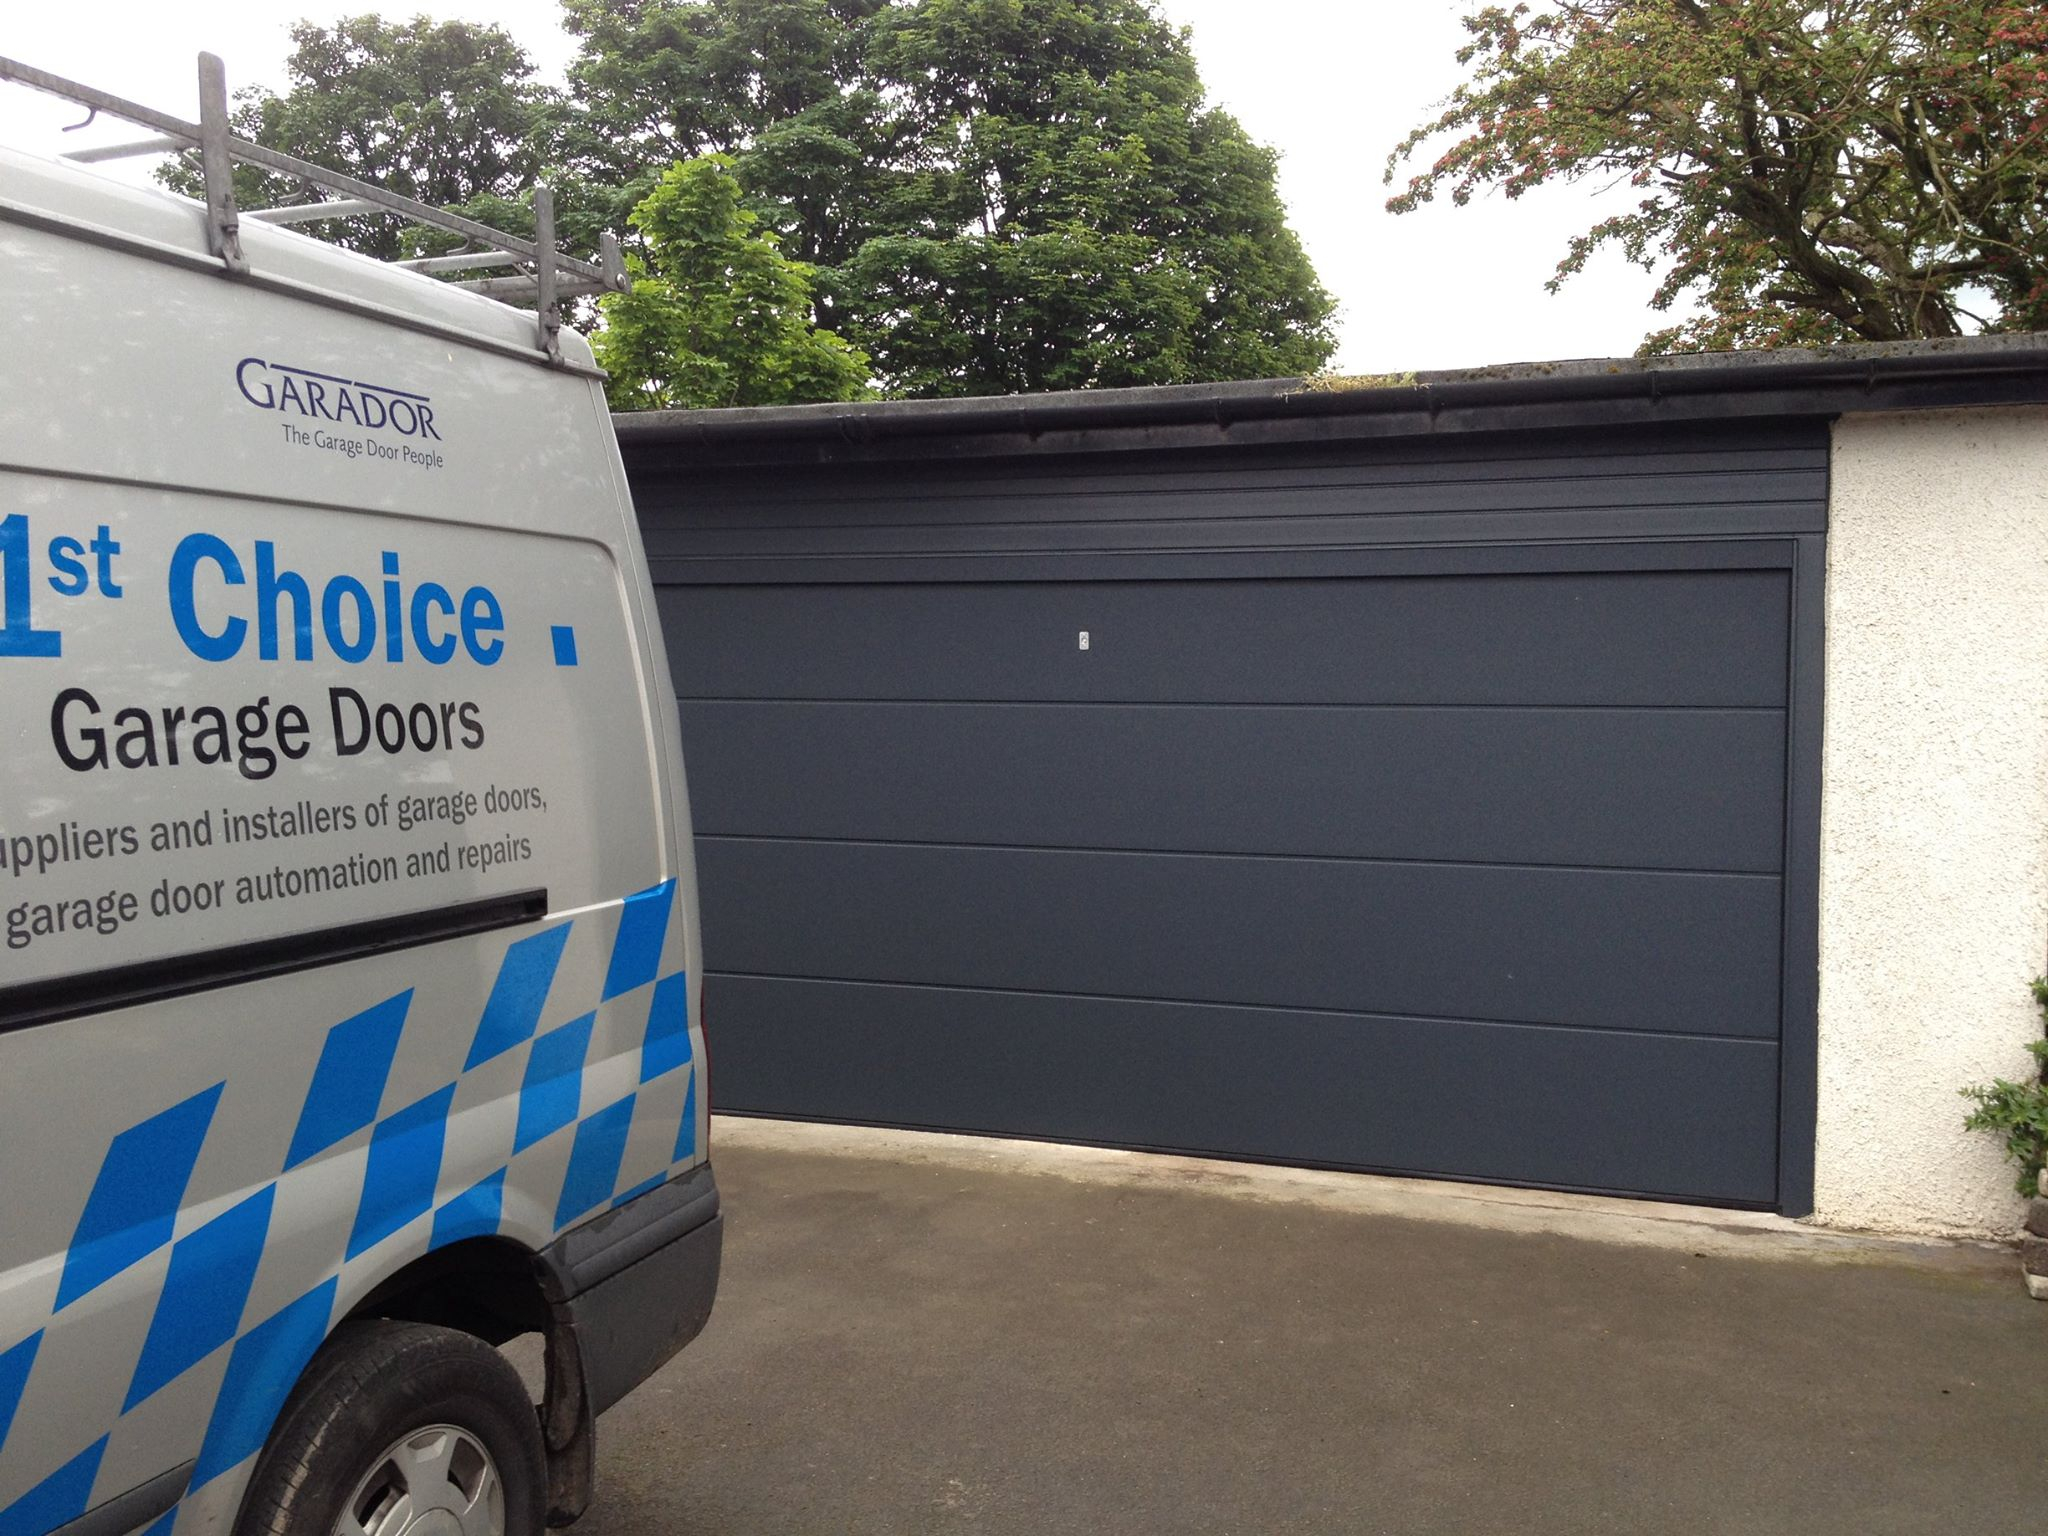 1st Choice Garage Doors Mirfield Yorkshire intended for dimensions 2048 X 1536